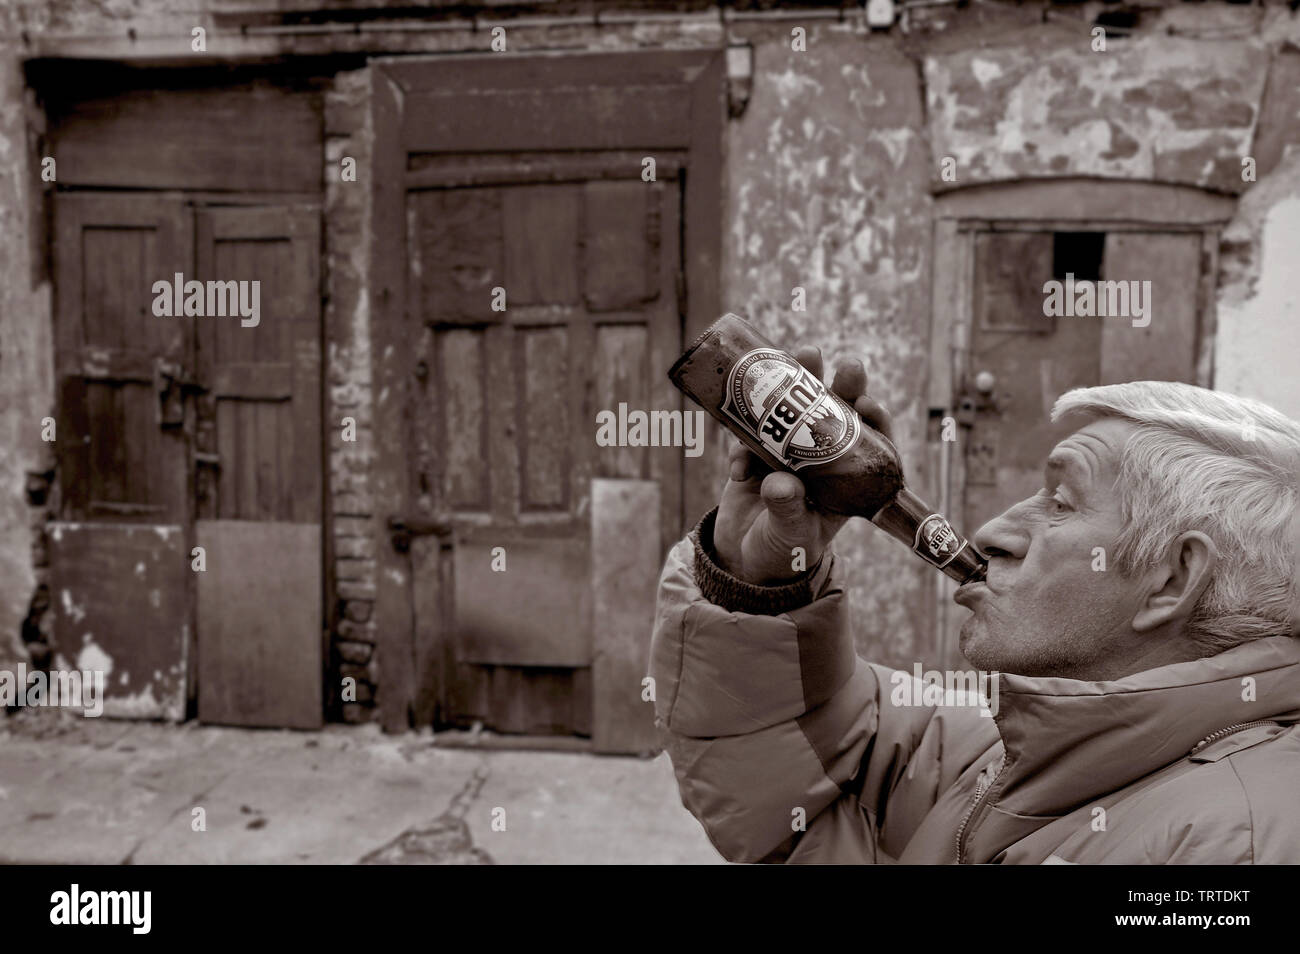 Man drinking from bottle Stock Photo